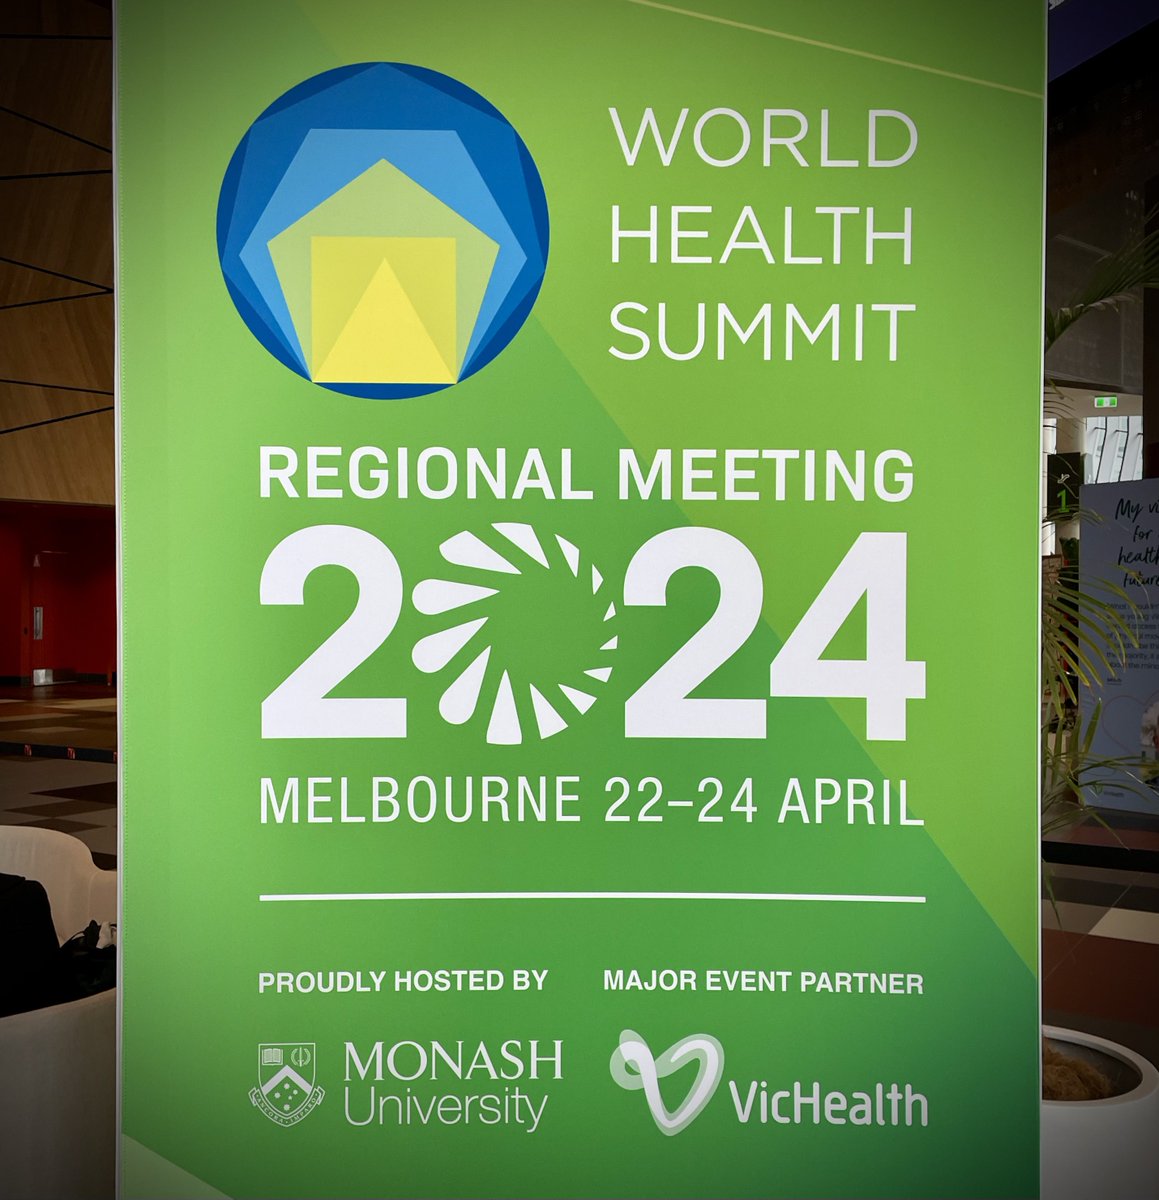 Valuable days exploring opportunities to #coalesce to improve #HealthForAll at #WHSMelbourne2024. Appreciated that not only have chronic disease/#NCDs been across the agenda, but diverse determinants common themes. Provoked, challenged, energised, motivated, connected. Thank You!